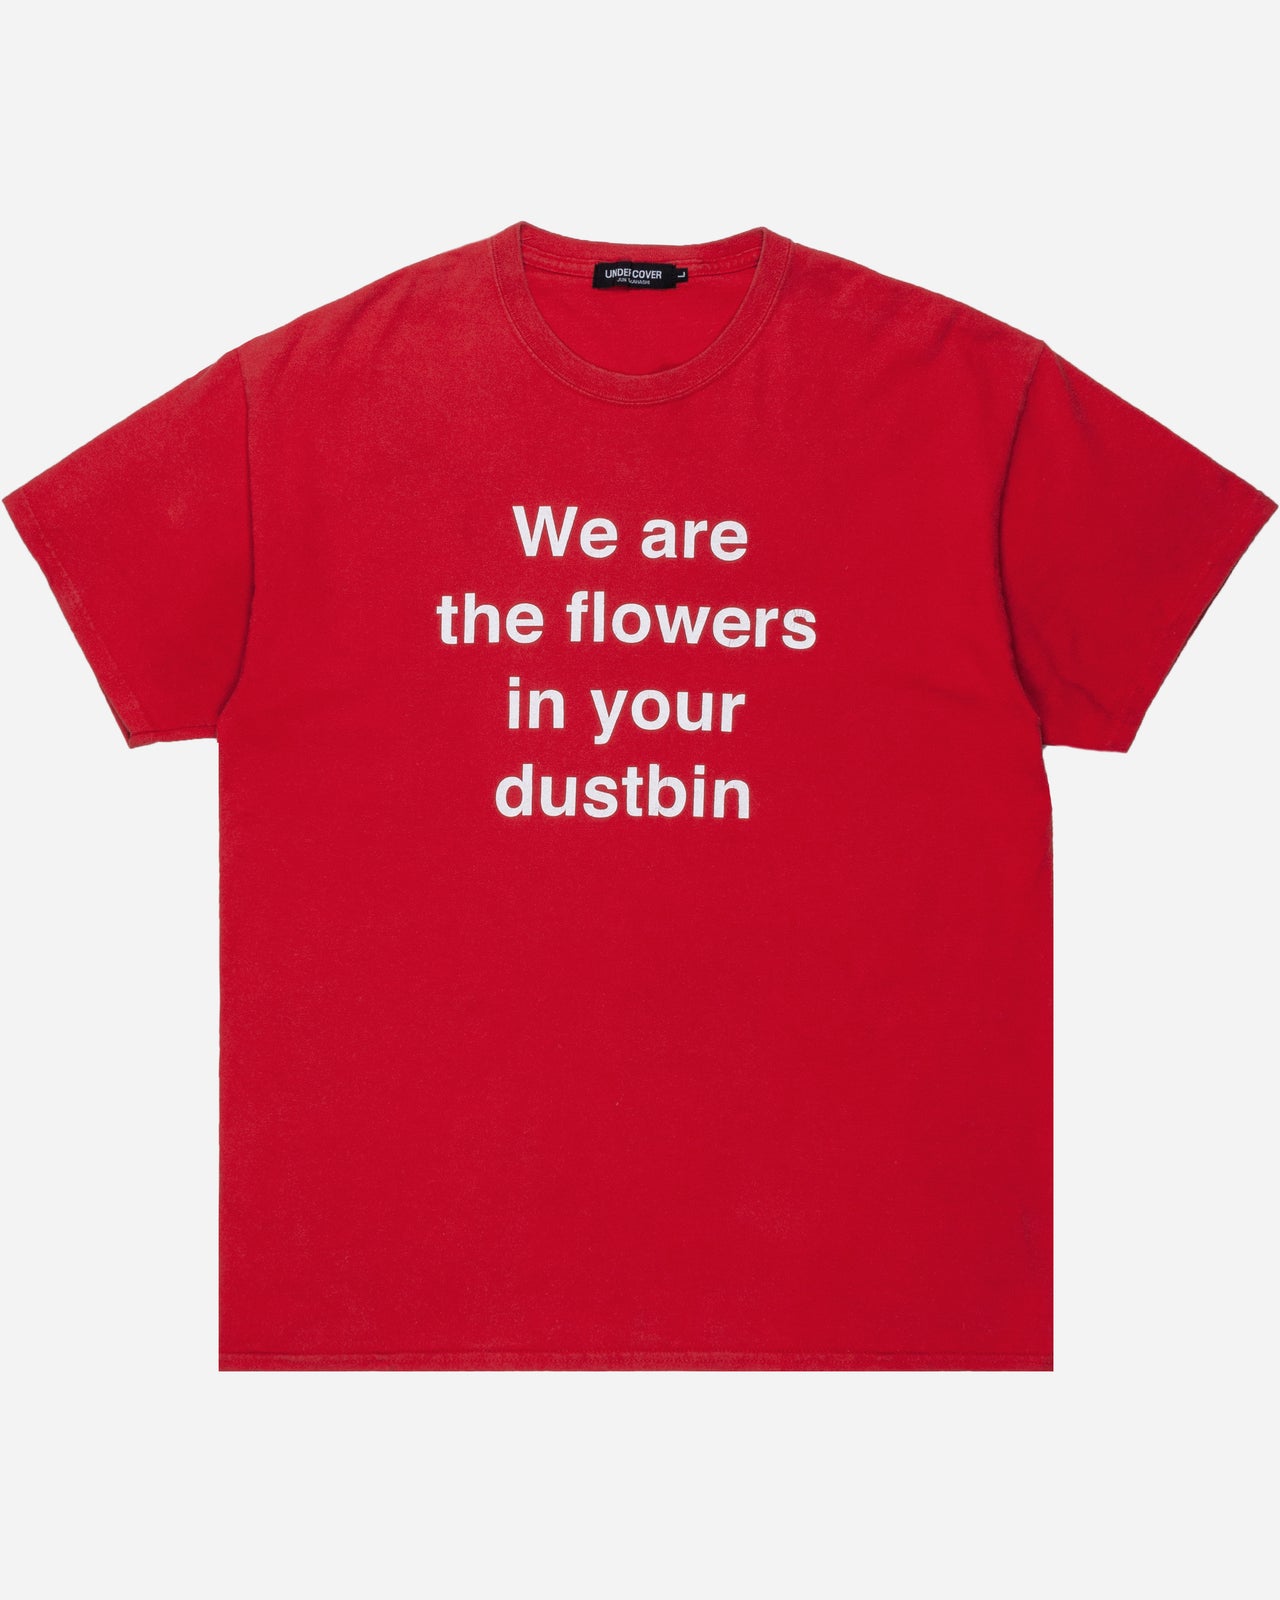 Undercover “We are the flowers in your dustbin” Tee